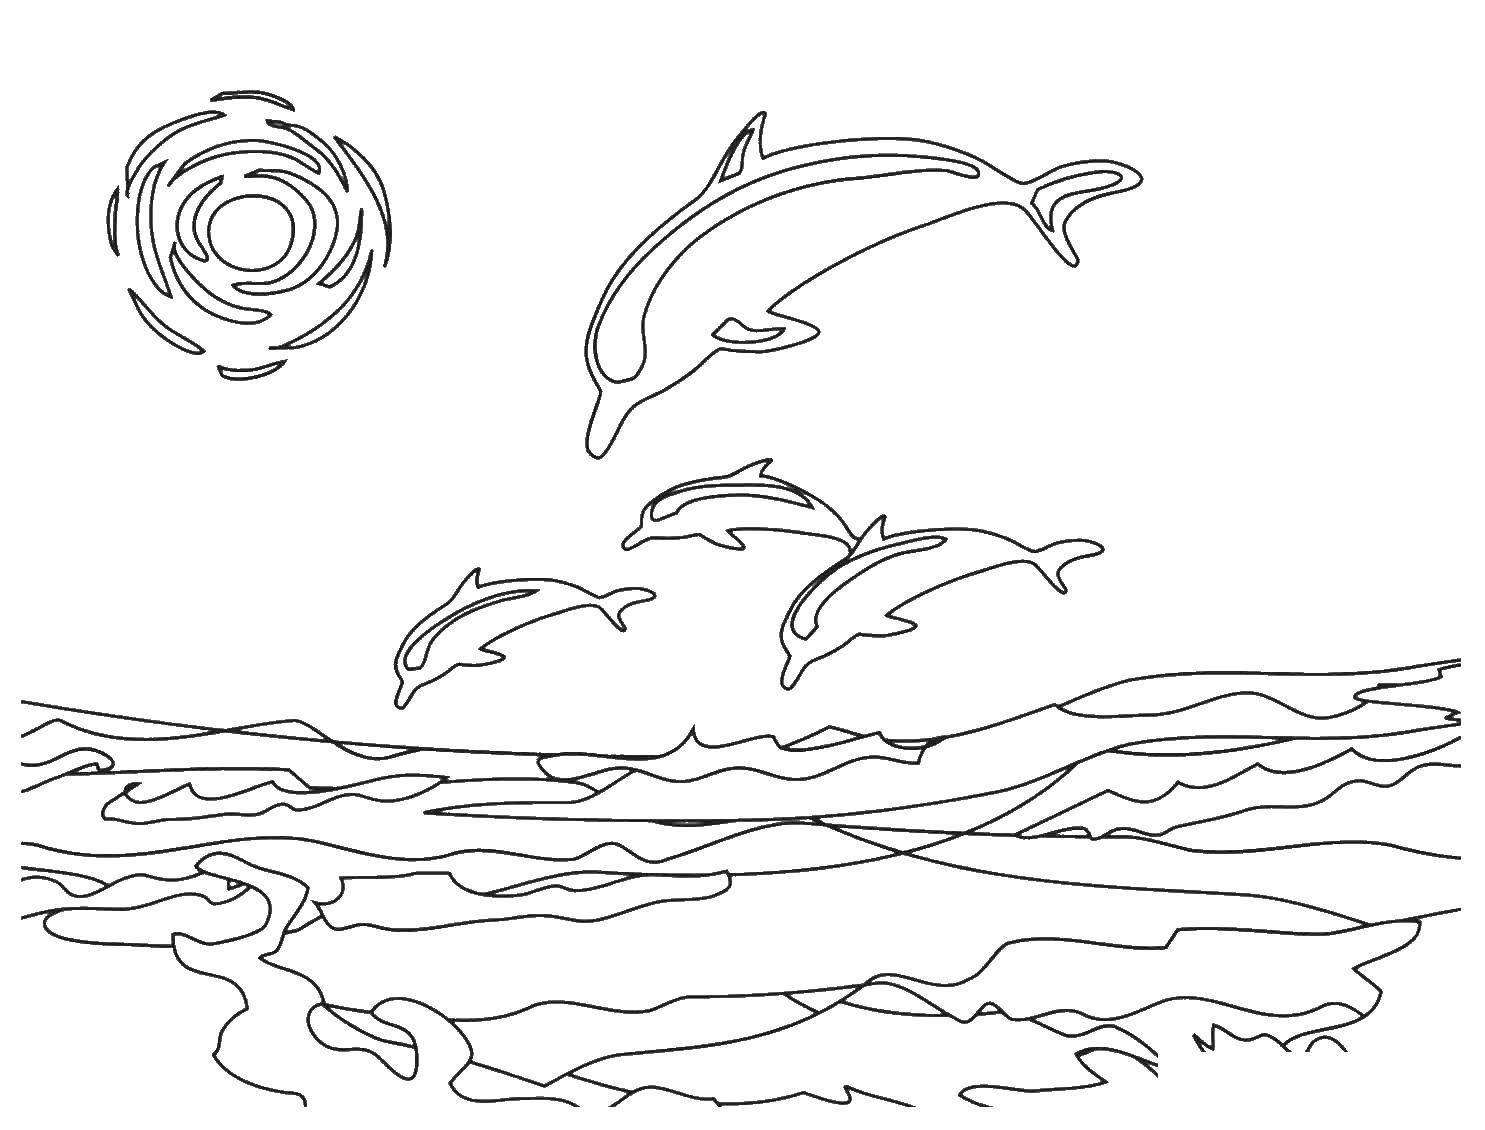 Coloring Dolphins. Category dolphins. Tags:  Dolphins.